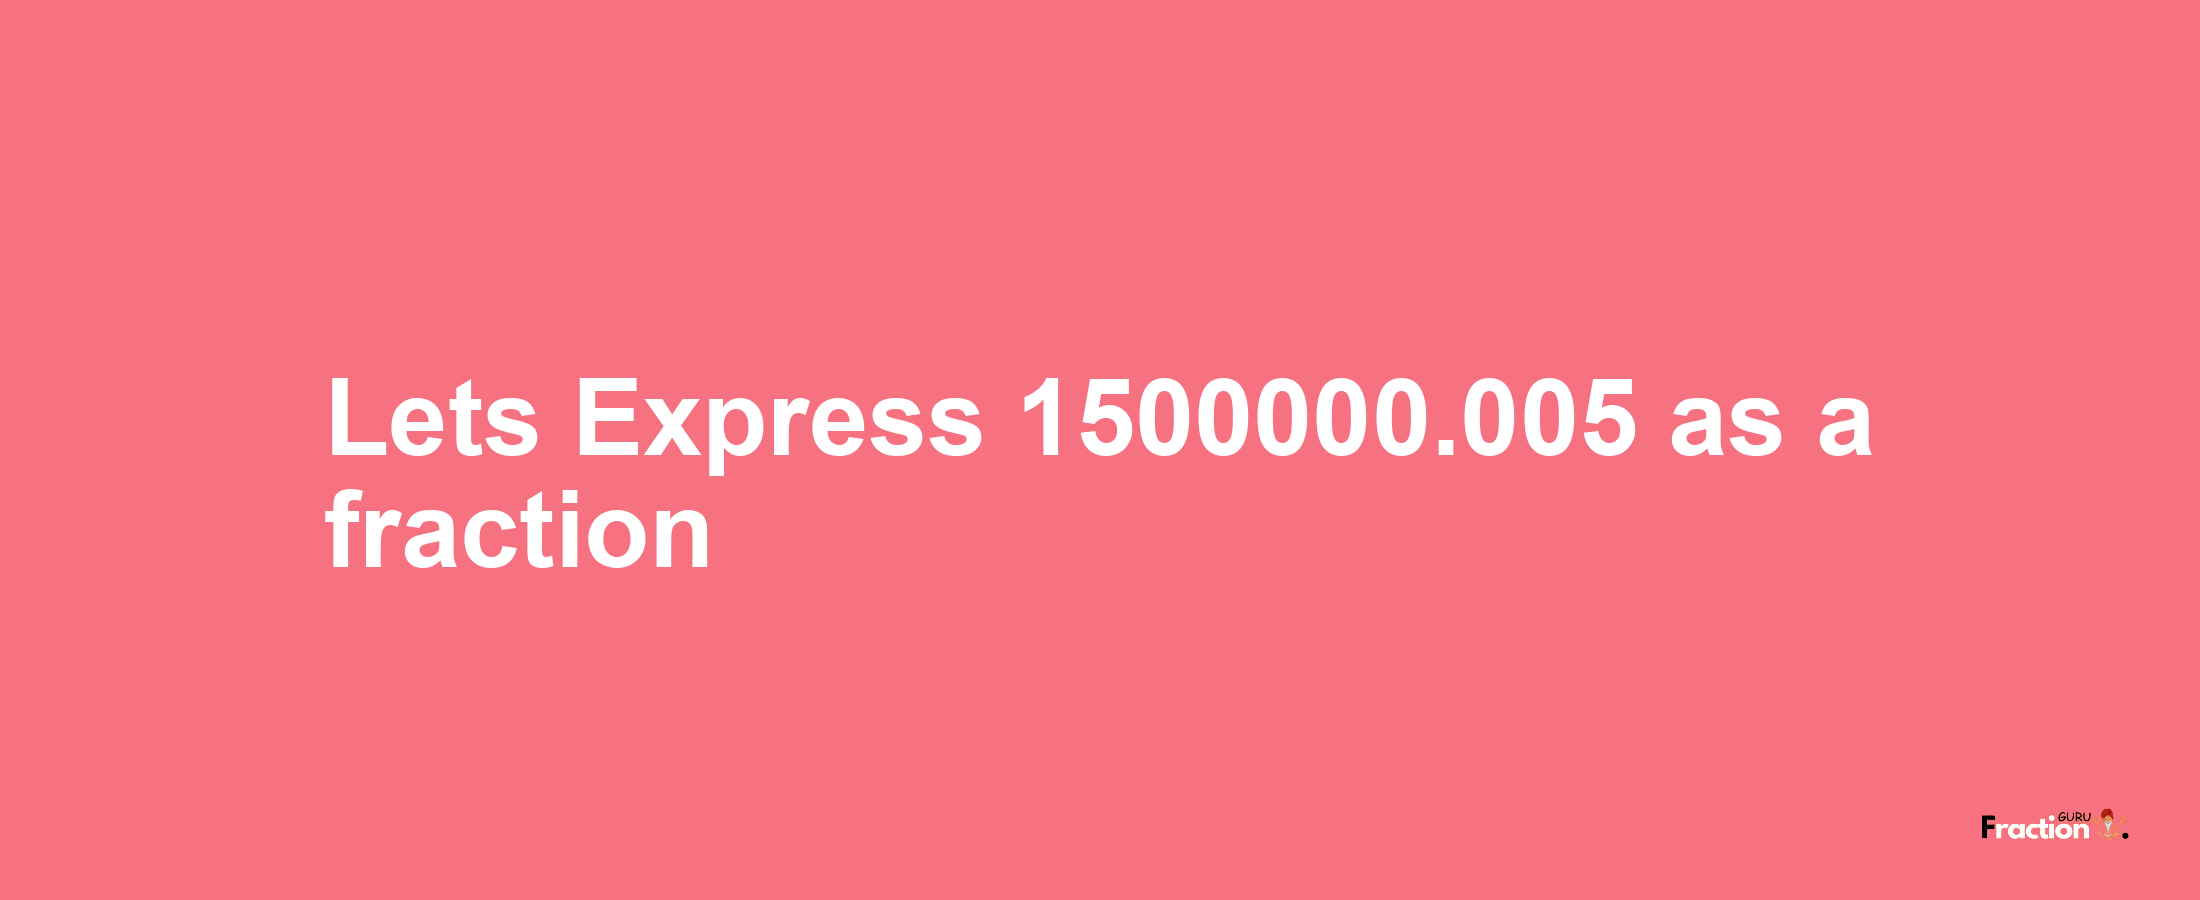 Lets Express 1500000.005 as afraction